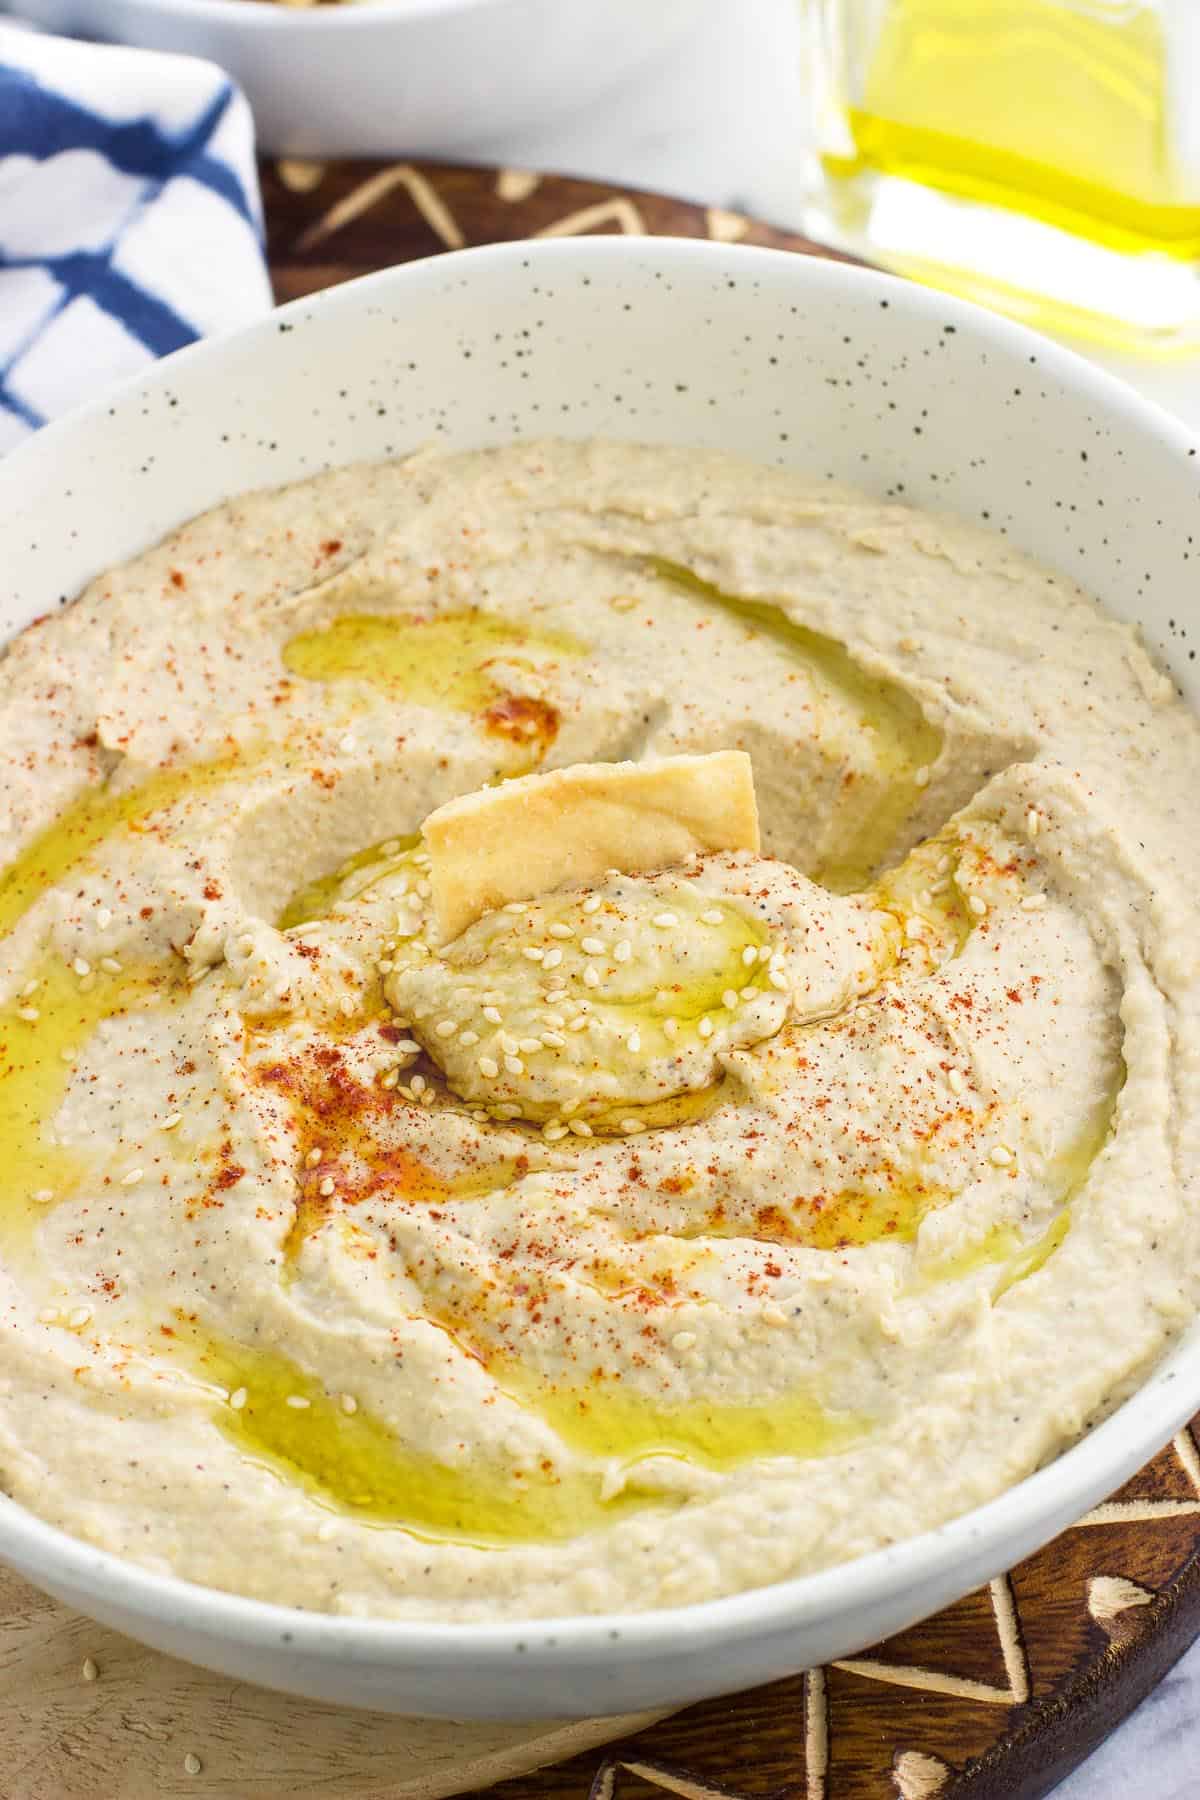 A pita chip scooped into a bowl of hummus.